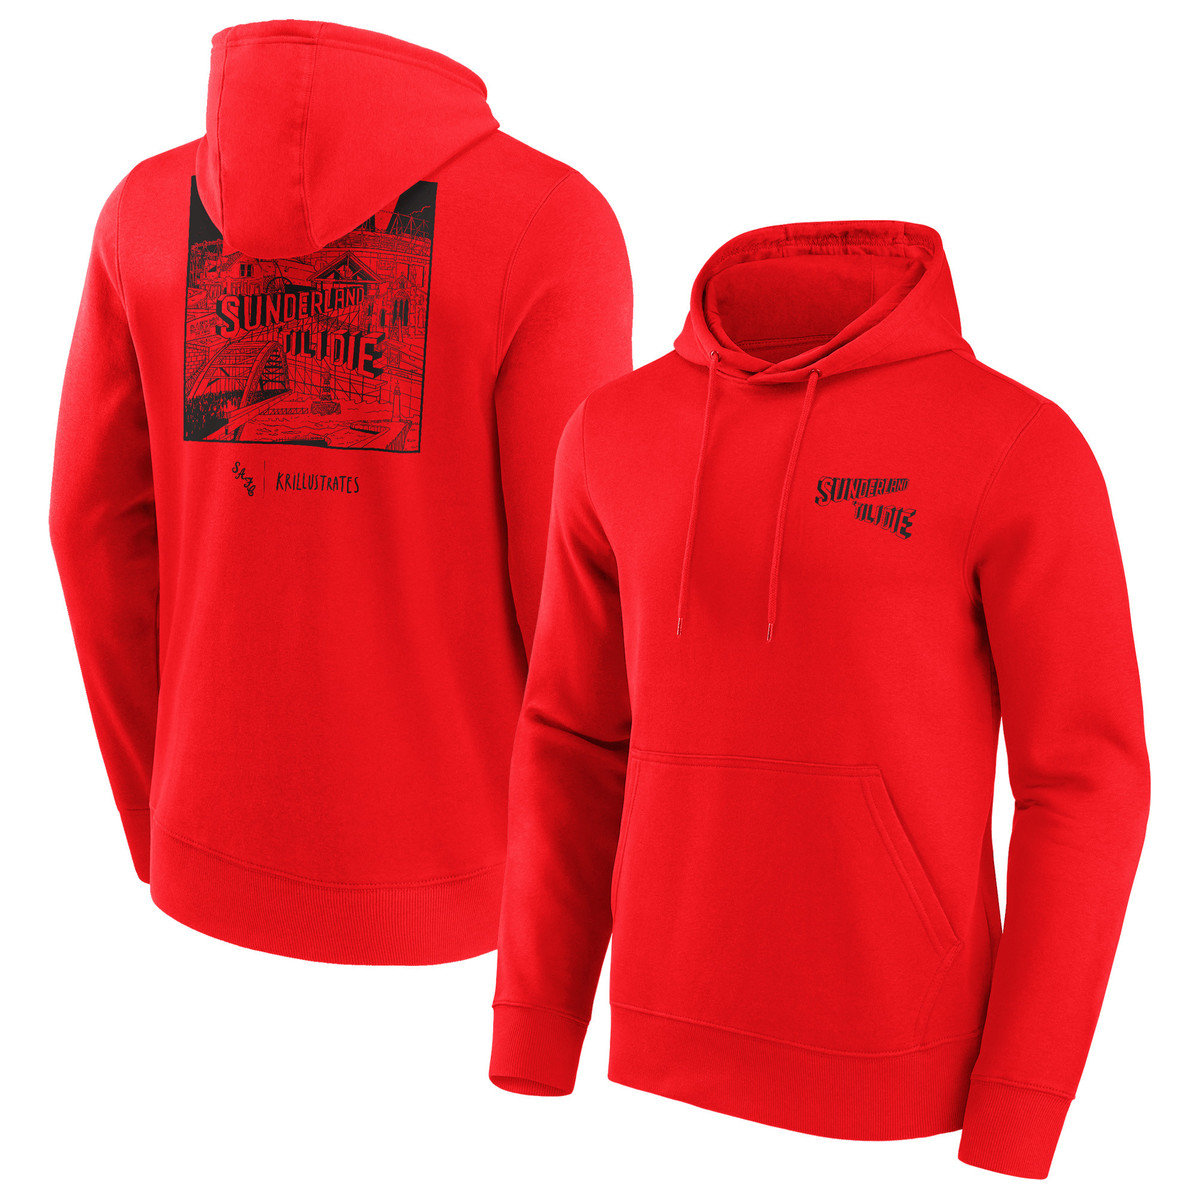 Buy the STID RED GRAPHIC HOODIE online at Sunderland AFC Store